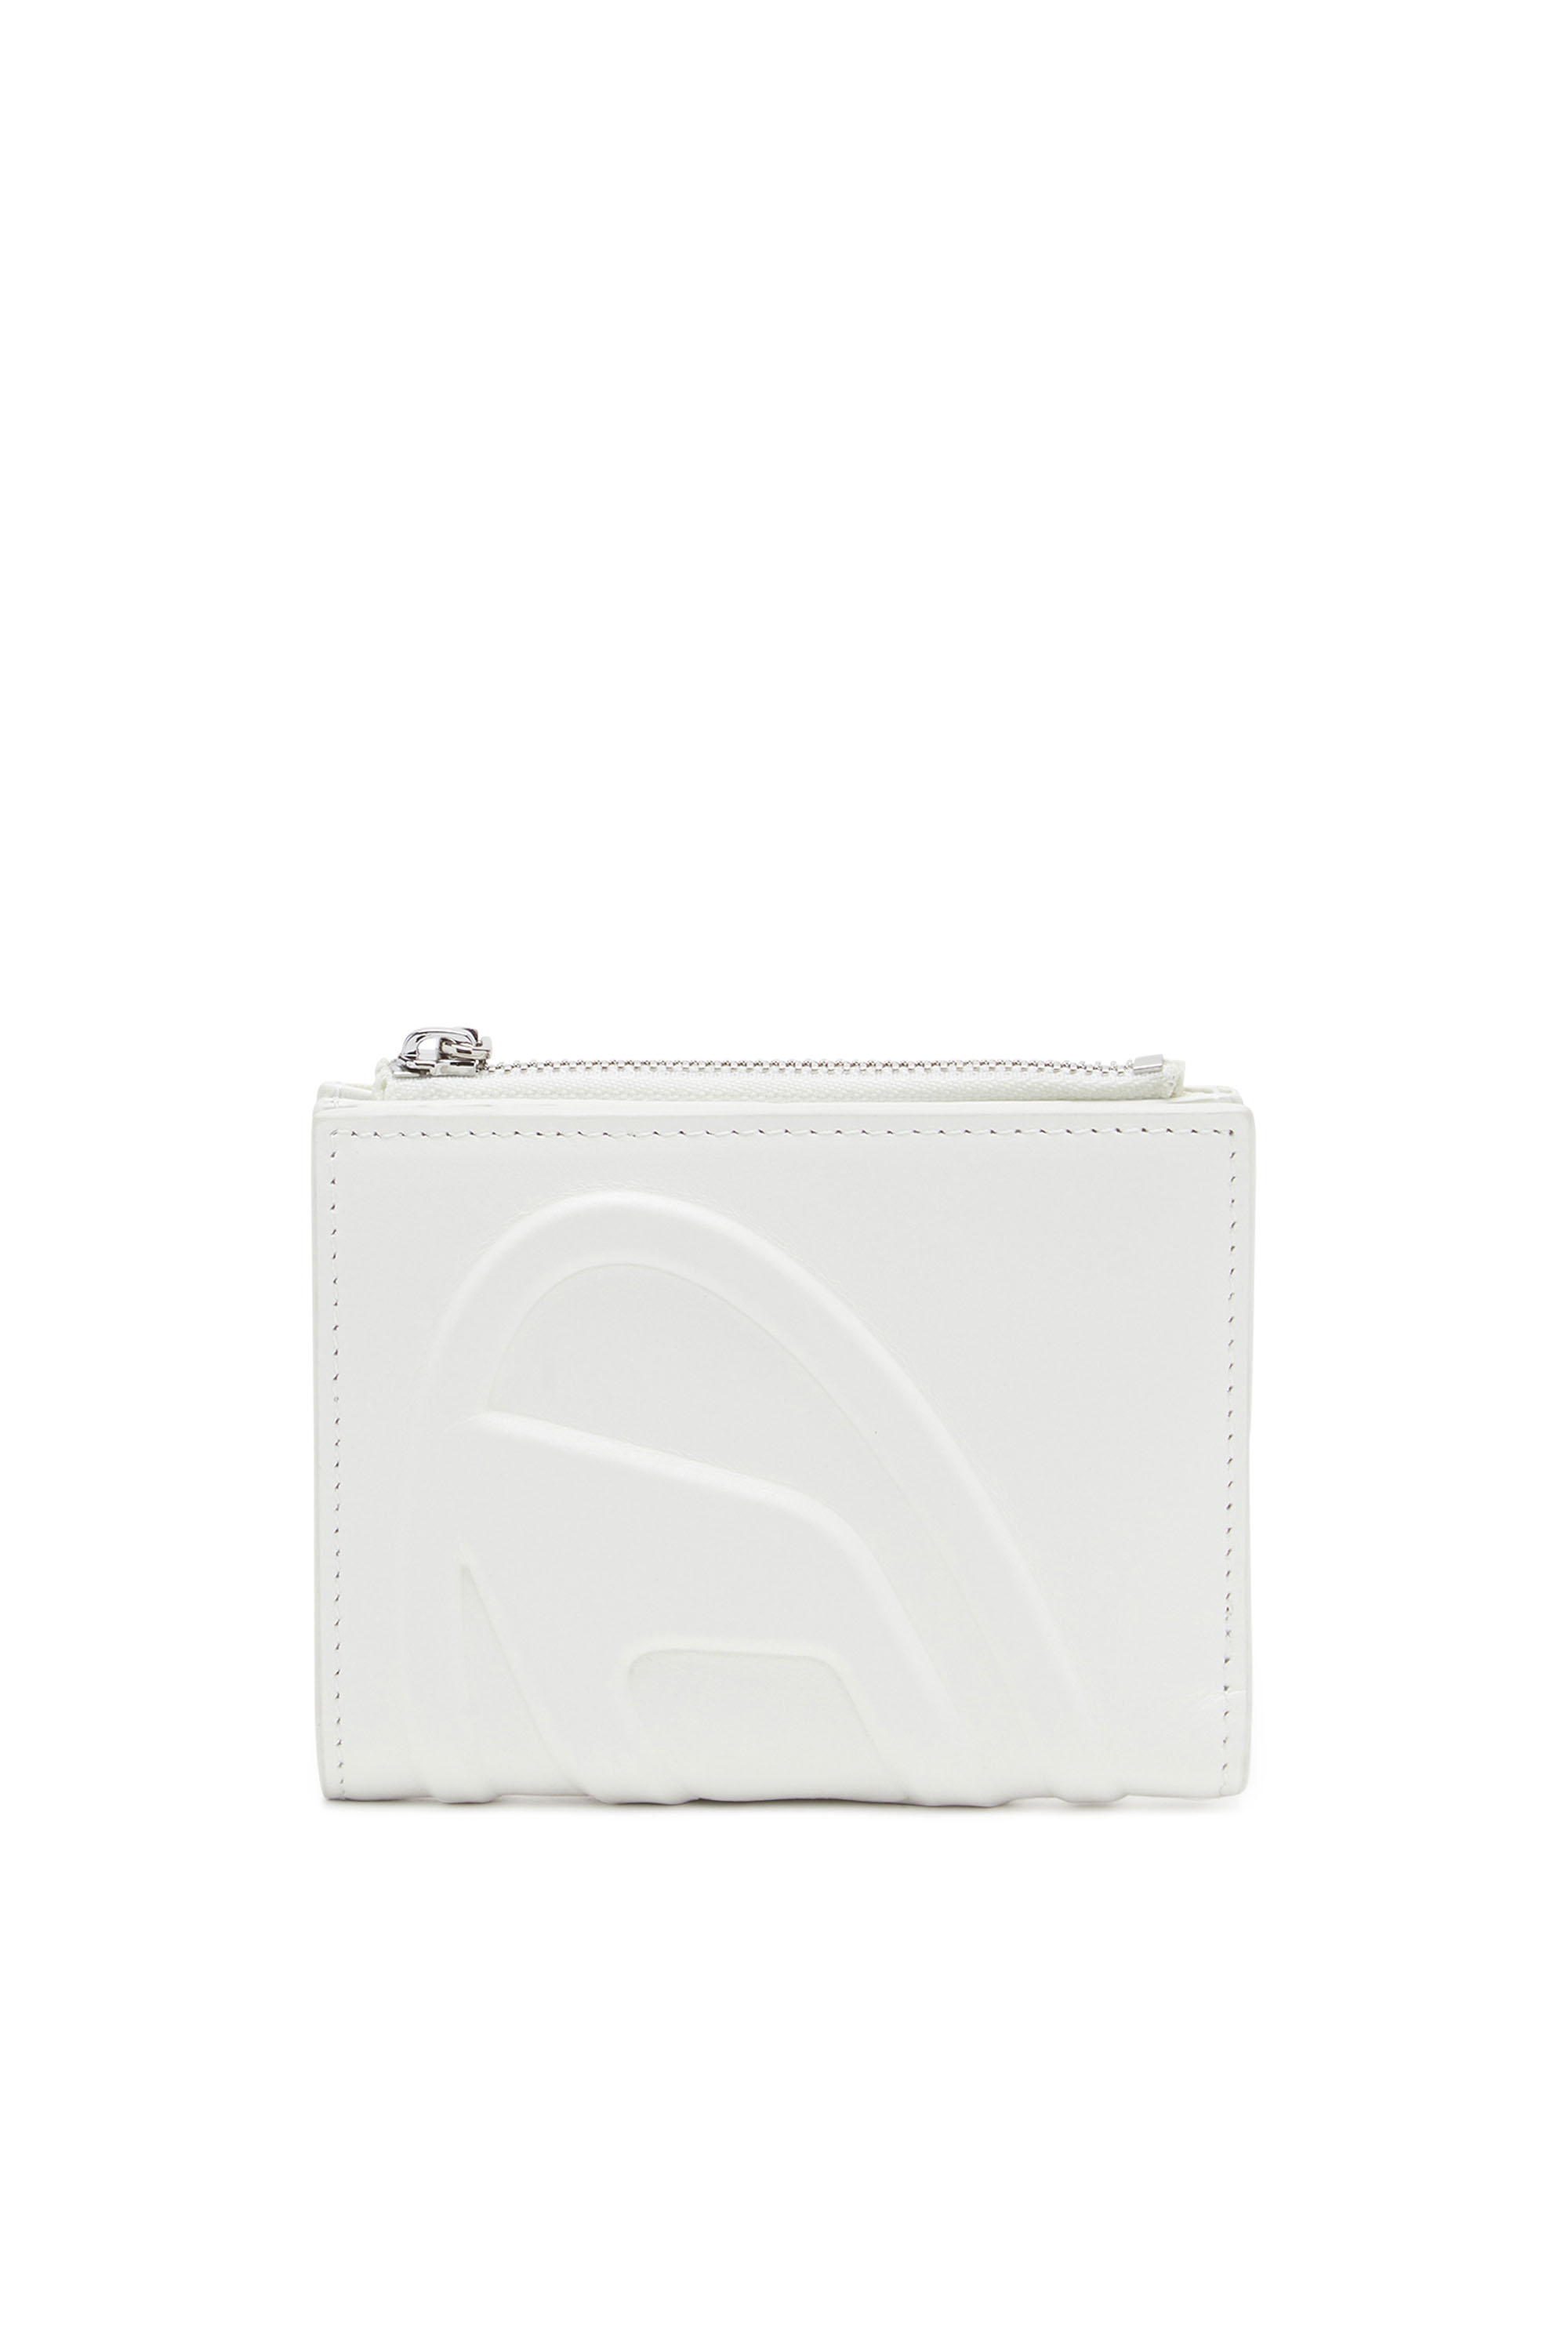 Diesel - Small leather wallet with embossed logo - Small Wallets - Woman - White